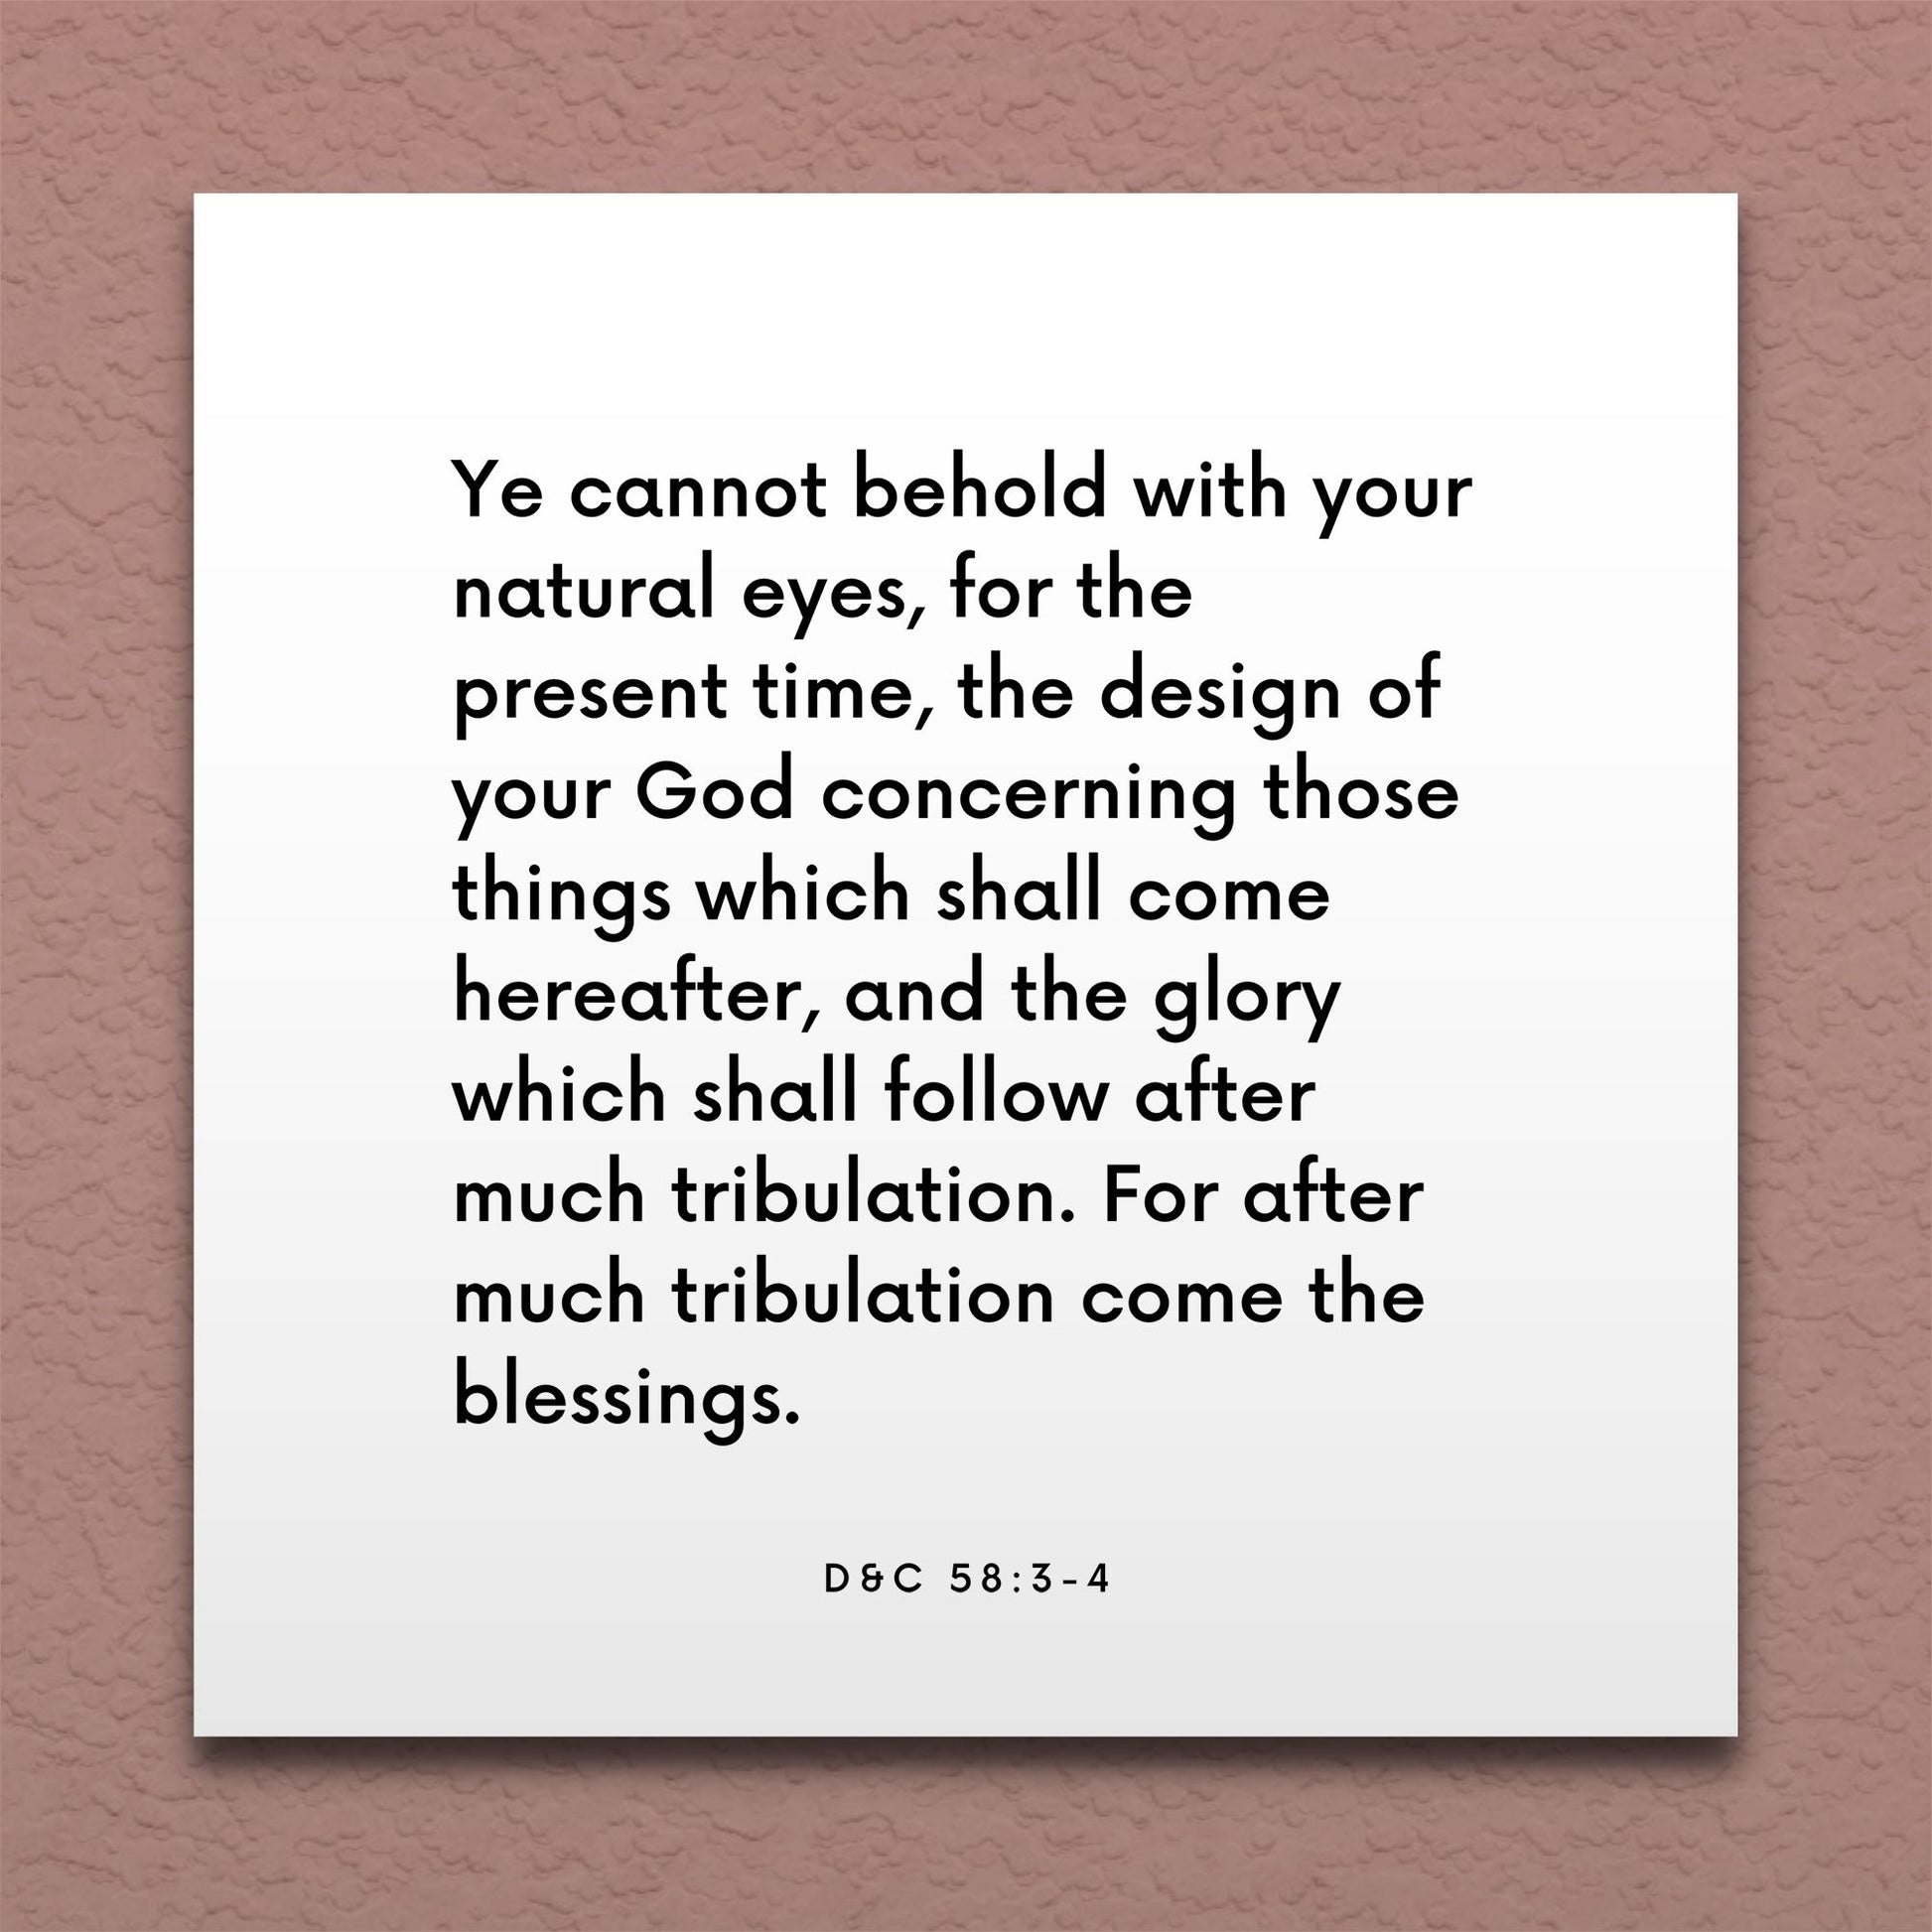 Wall-mounted scripture tile for D&C 58:3-4 - "Ye cannot behold with your natural eyes"